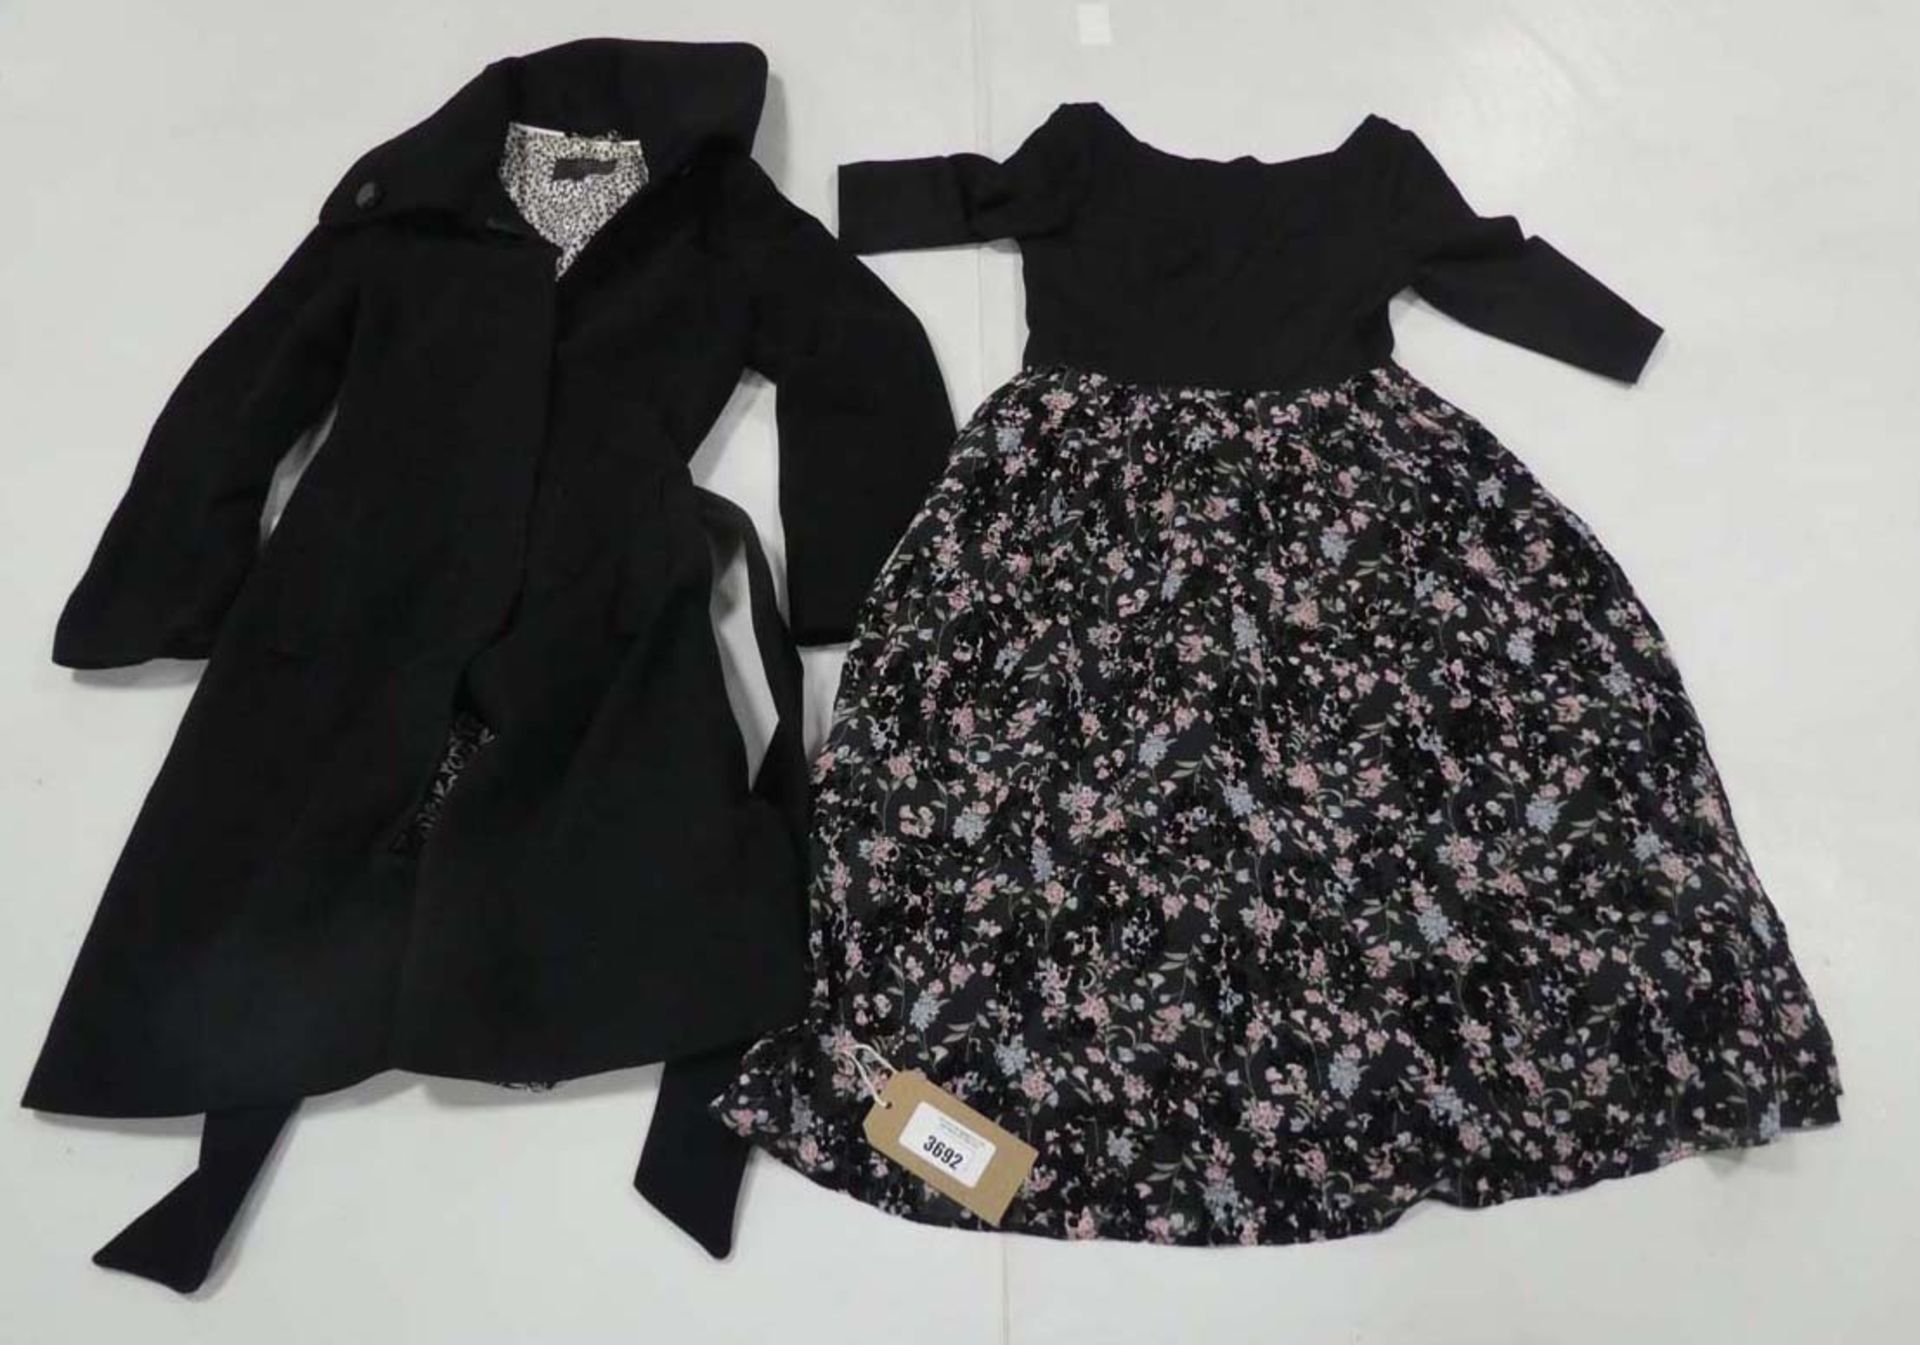 Ladies Coast jacket in black together with floral dress both size 10